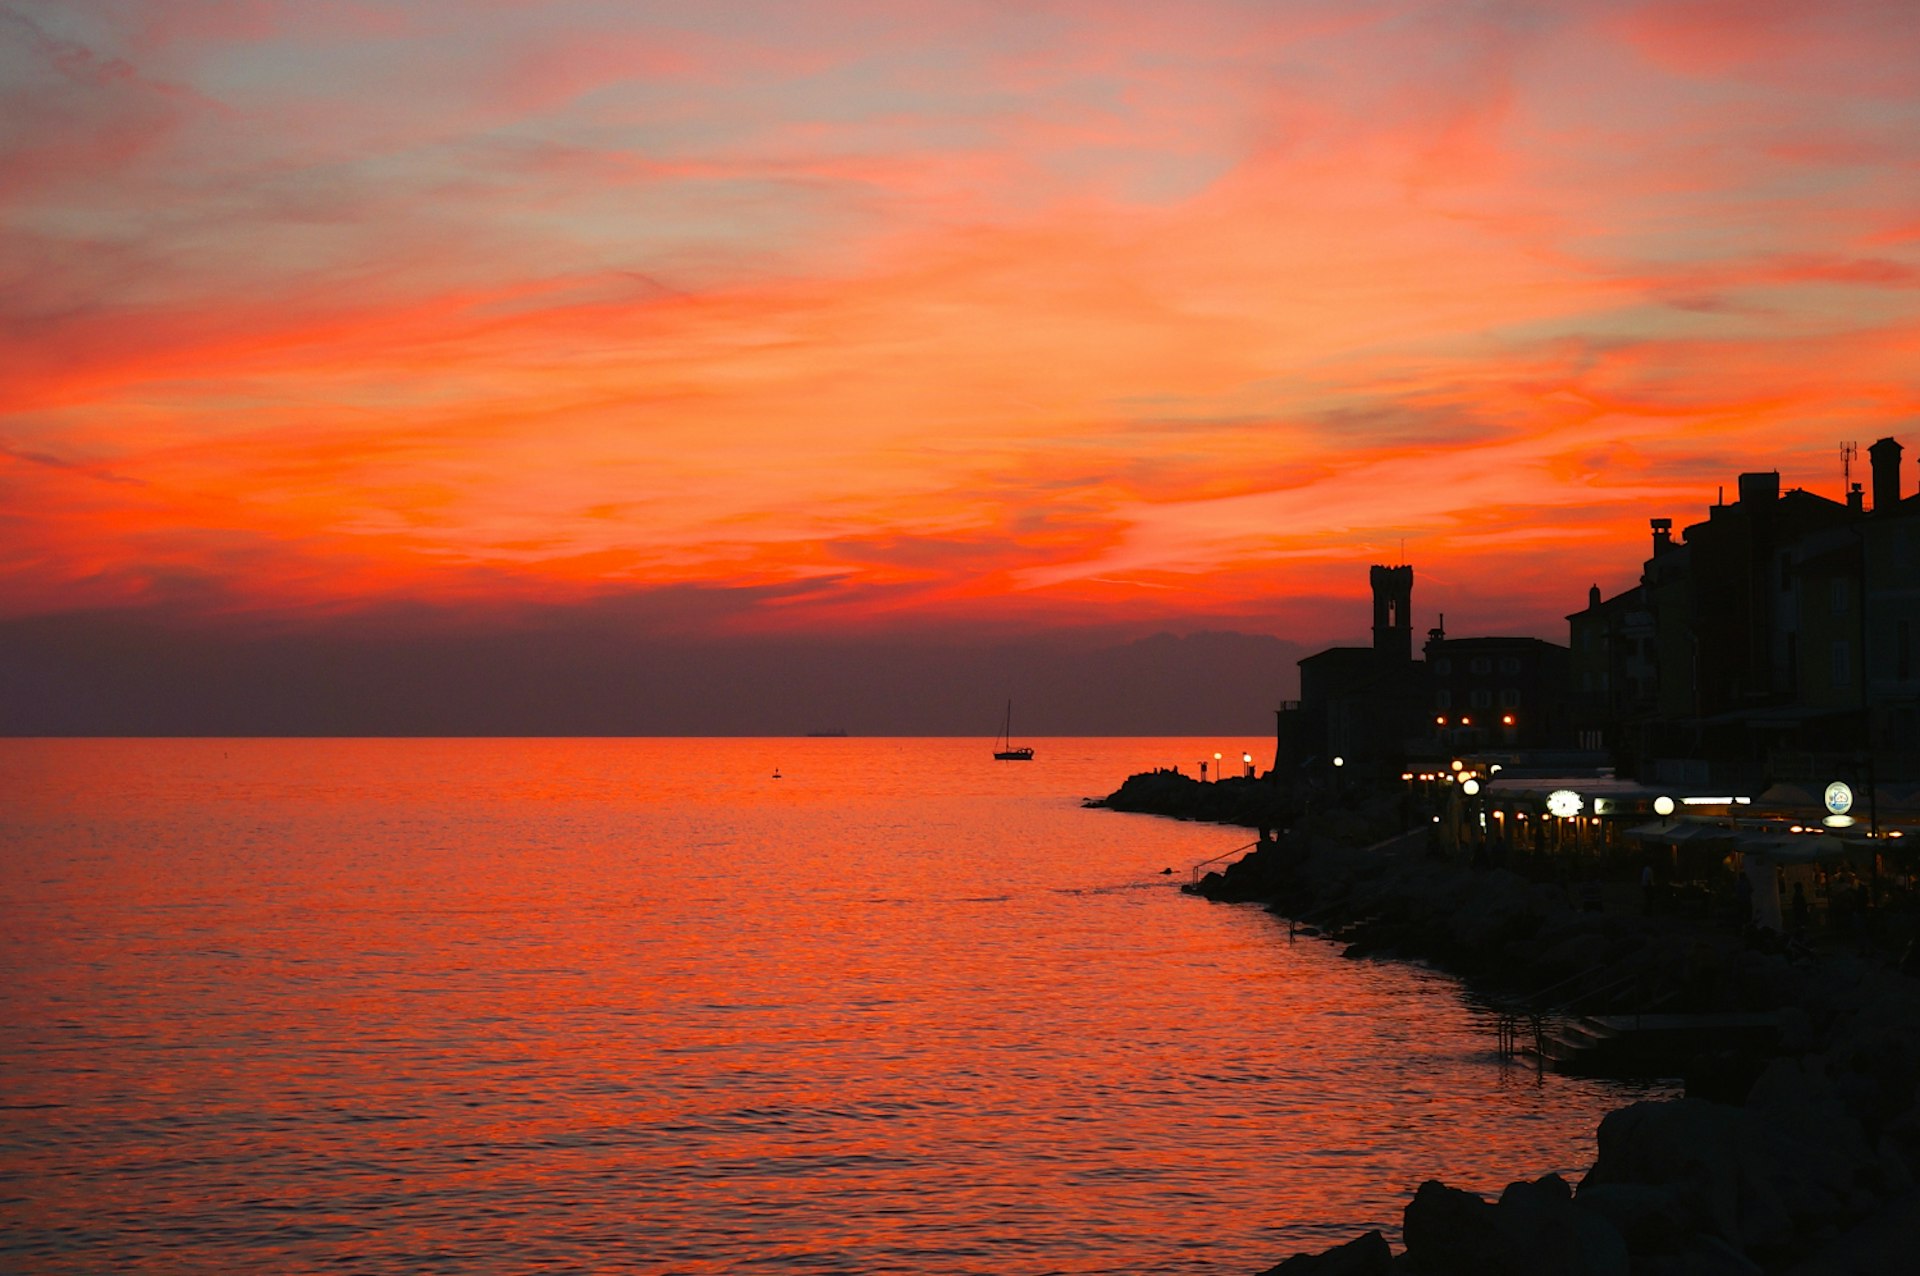 An orange and purple sky is reflected in the calm sea. Buildings lining the shore and a boat in the sea appear as silhouettes